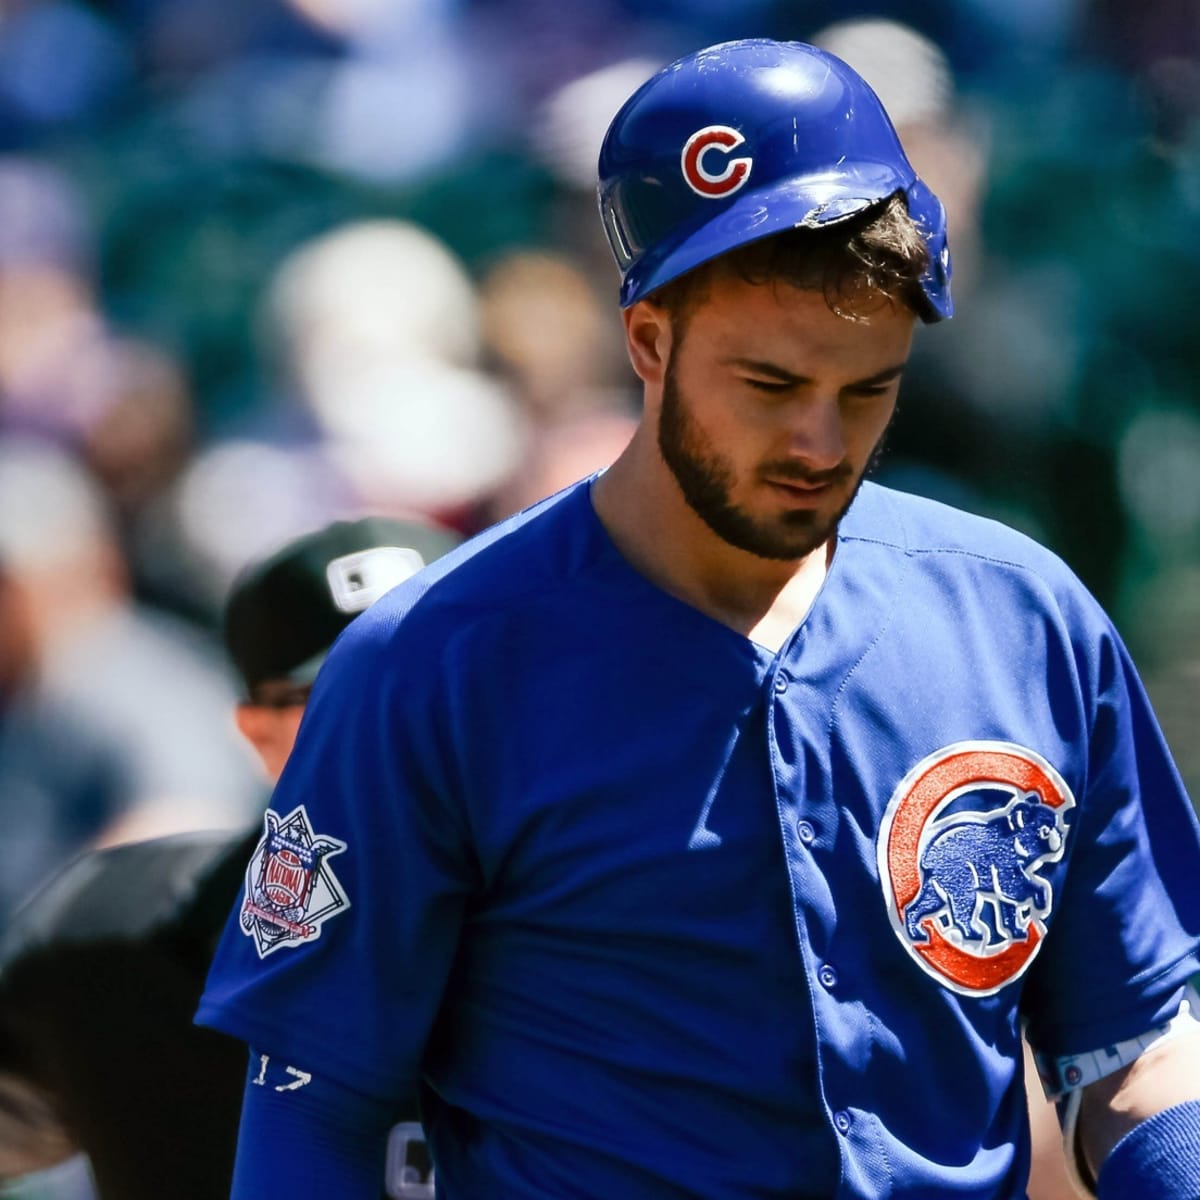 Kris Bryant hasn't been the same since he was hit in the head in 2018 -  Bleed Cubbie Blue